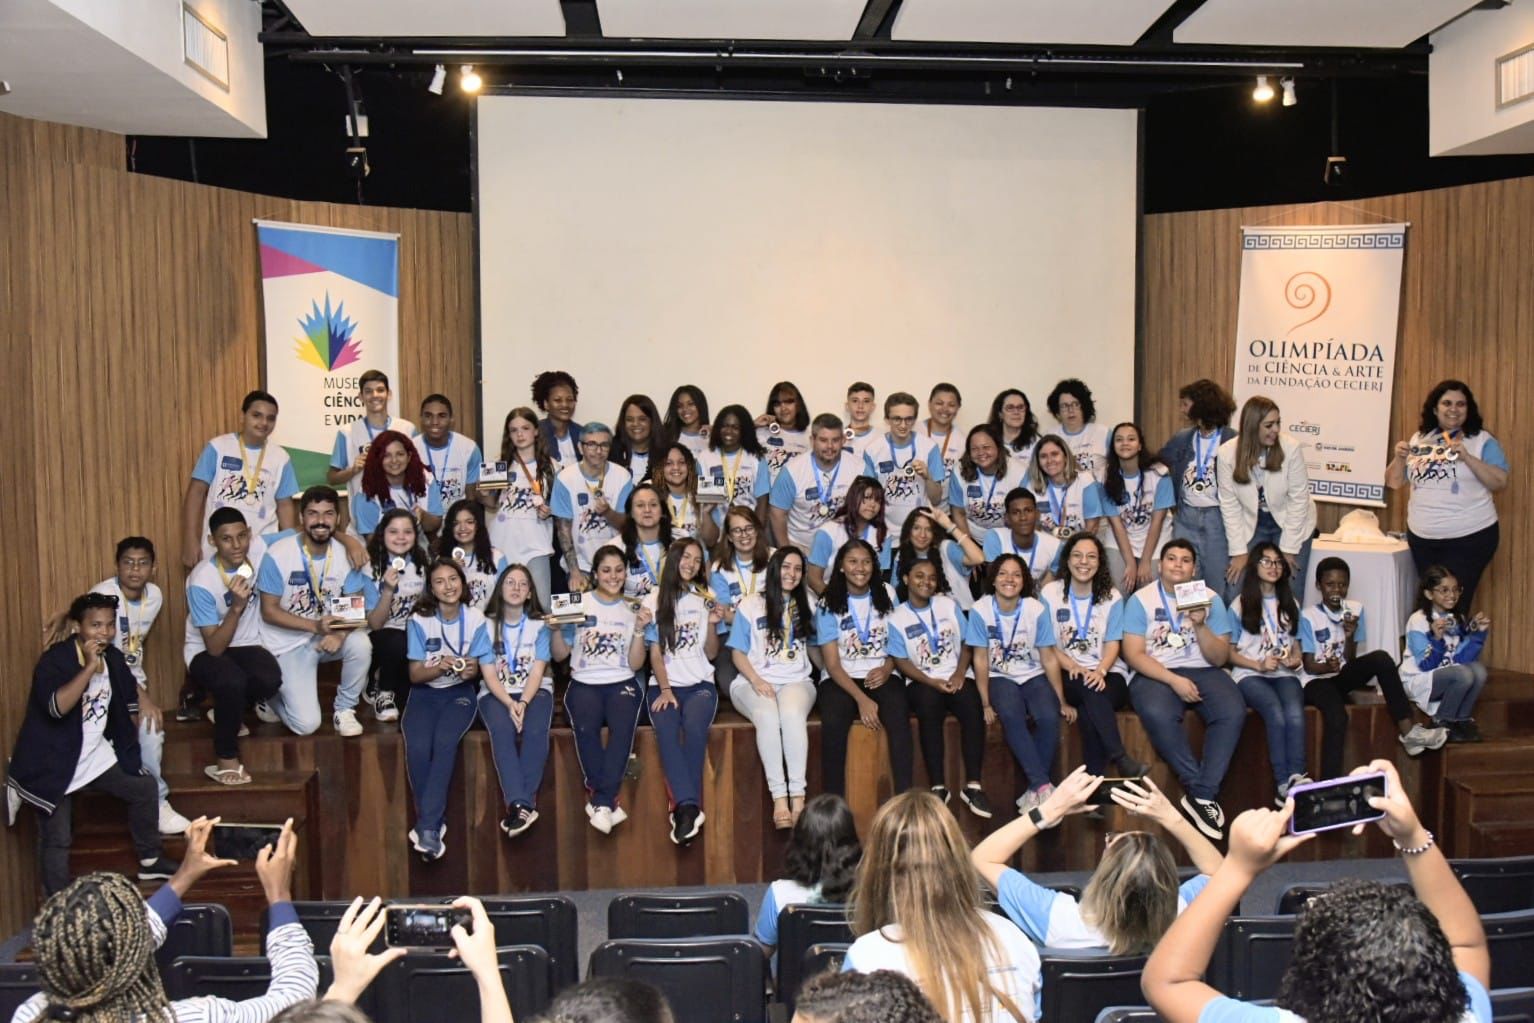 The 2nd Arts and Sciences Olympiad Awards Ceremony, on Saturday (21), was marked by a lot of emotions and joy